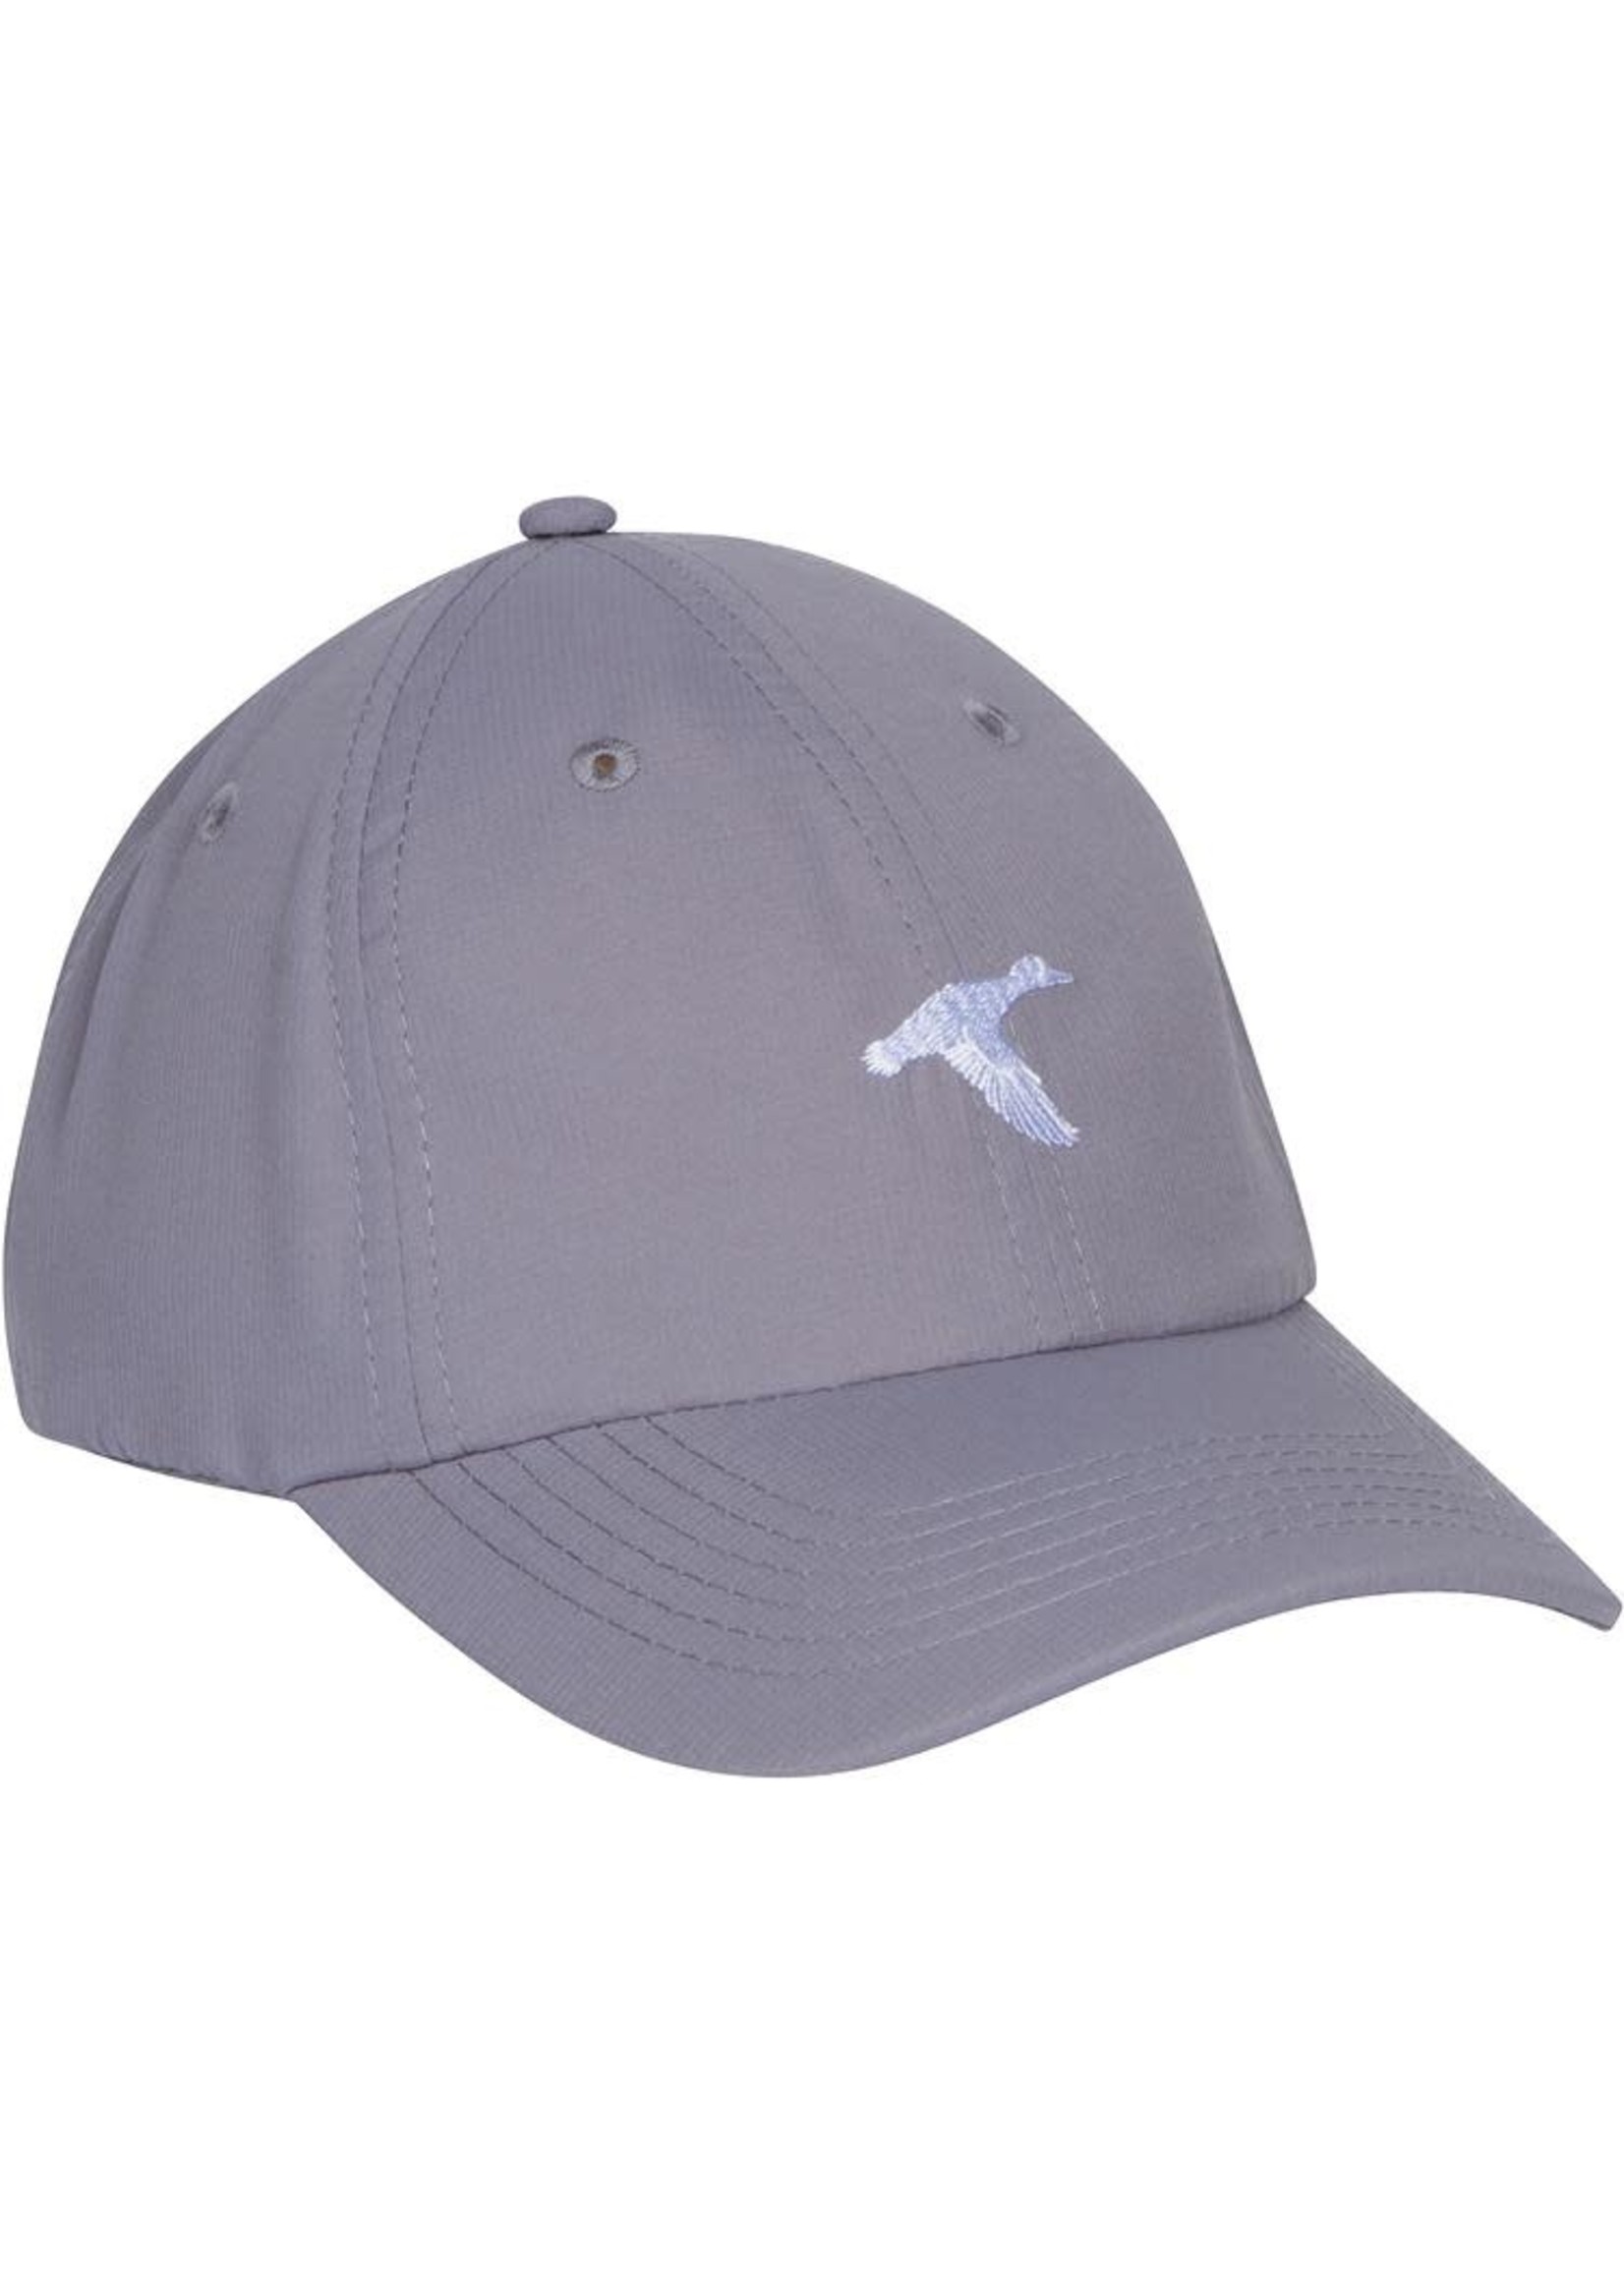 GenTeal Apparel Embroidered Performance Hat